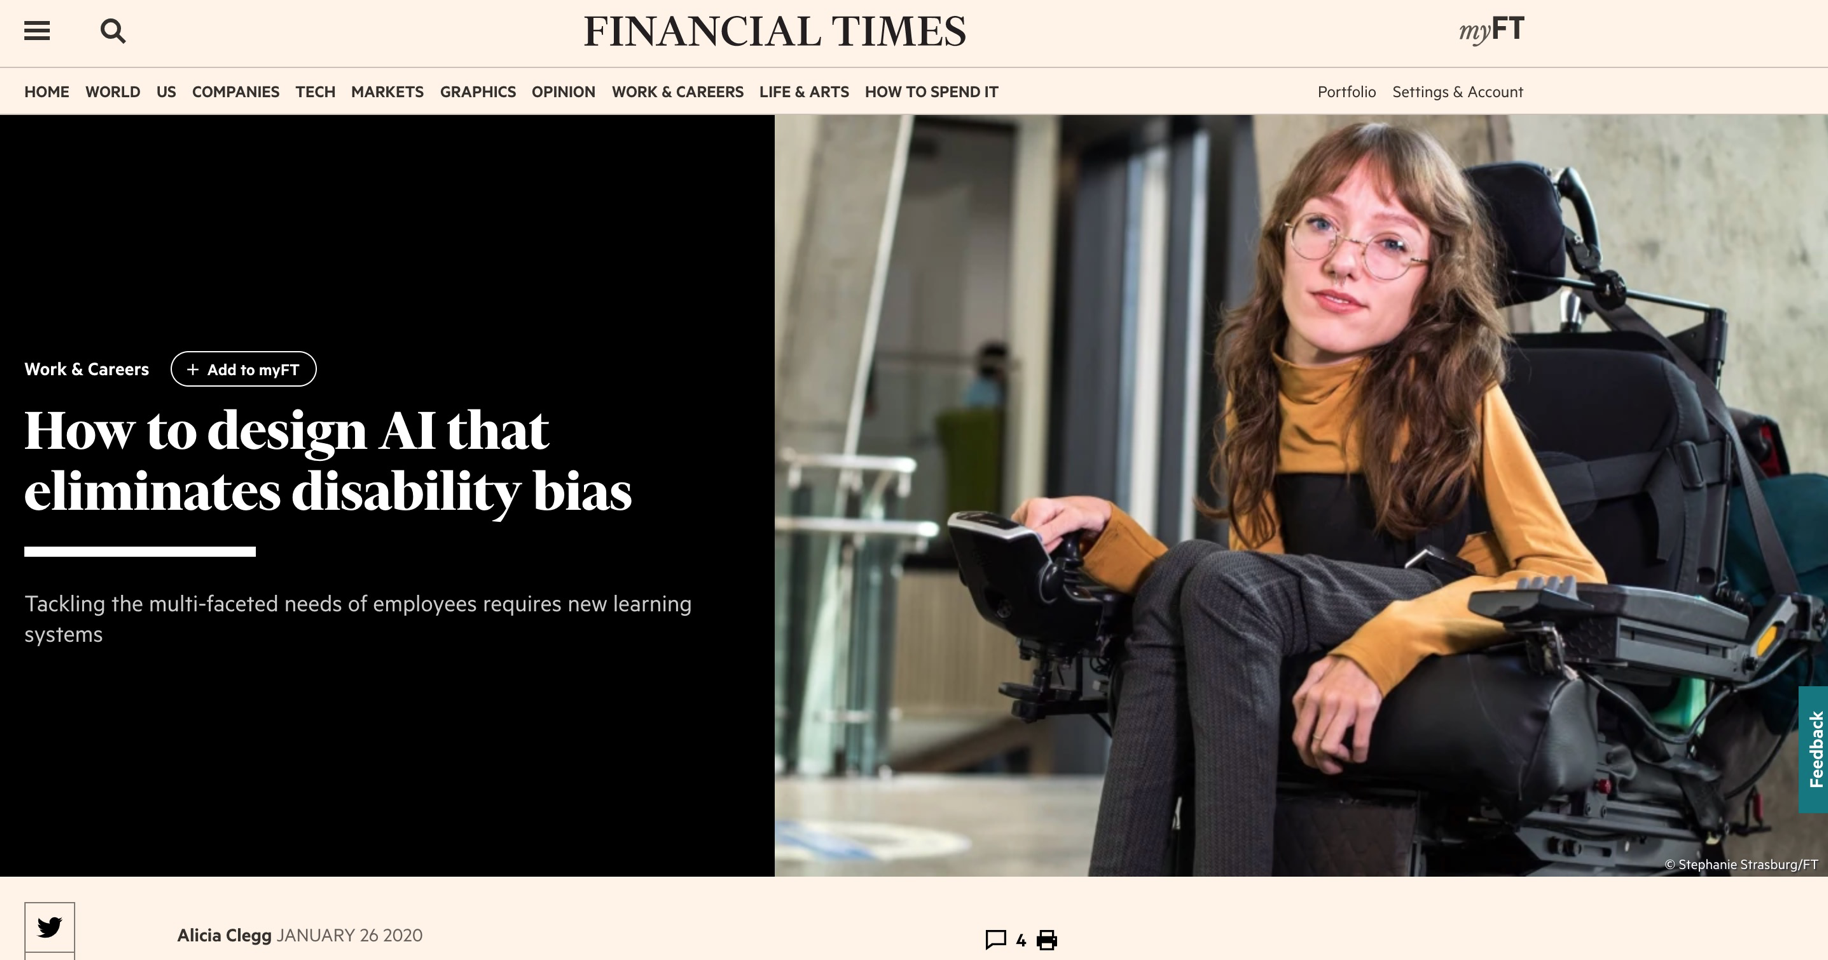 How to design AI that eliminates disability bias. An article for the Financial Times by Alicia Clegg